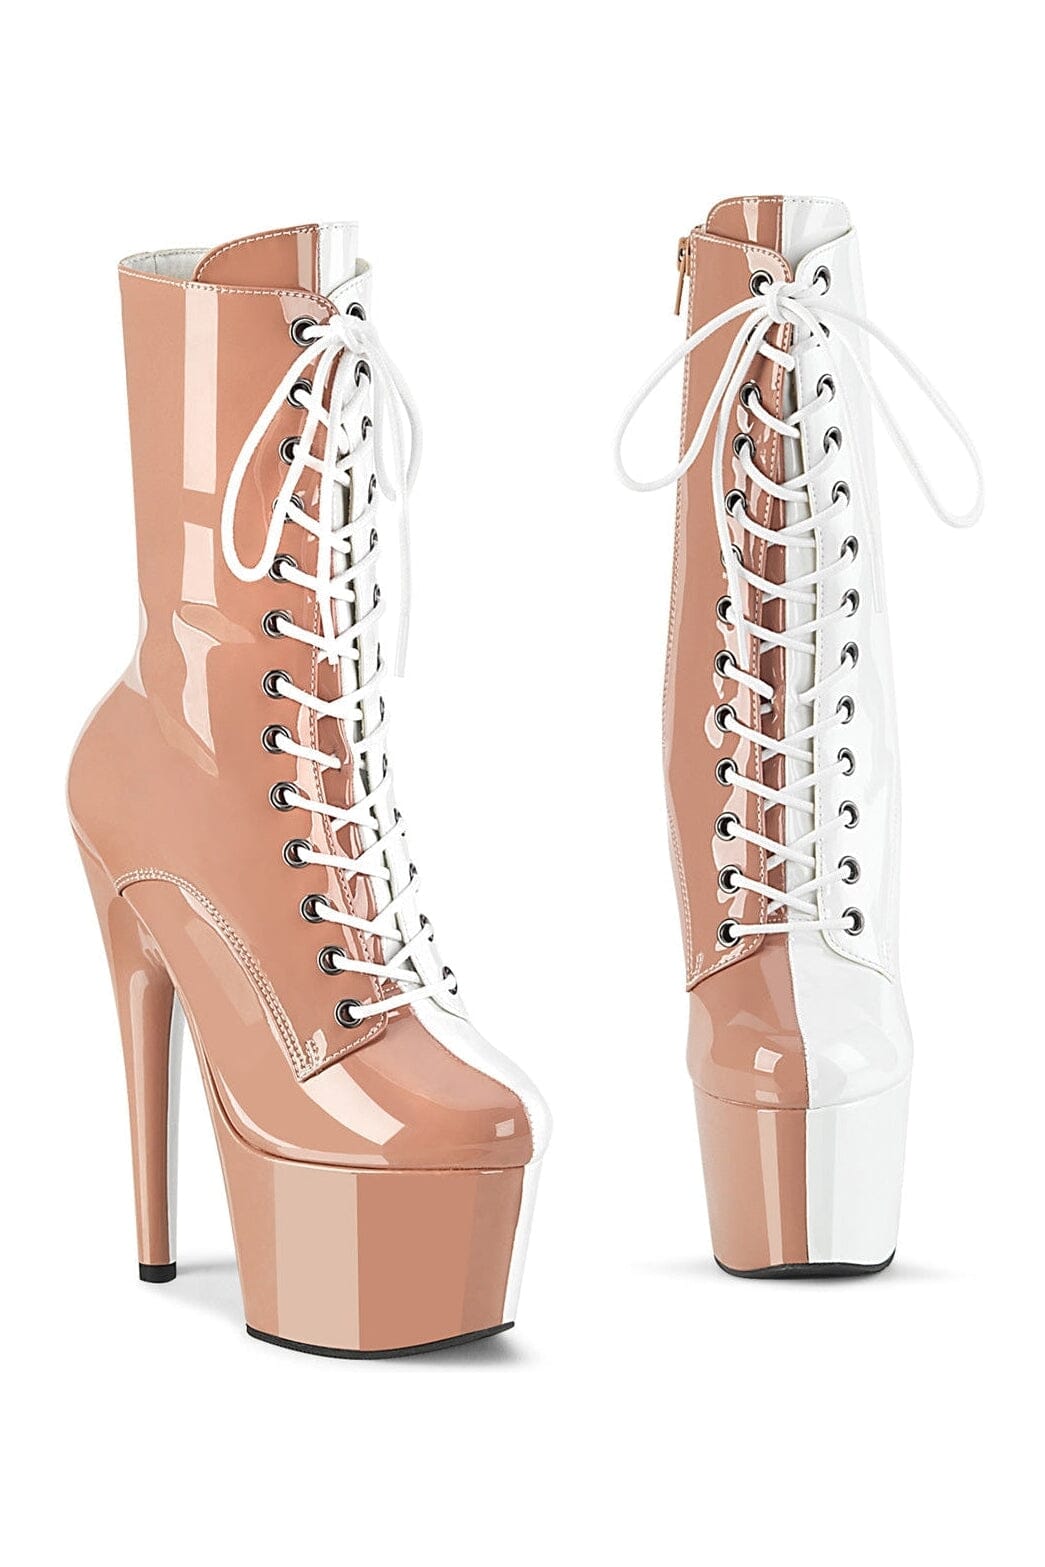 ADORE-1040TT Rose Gold Patent Ankle Boot-Ankle Boots-Pleaser-Rose Gold-10-Patent-SEXYSHOES.COM